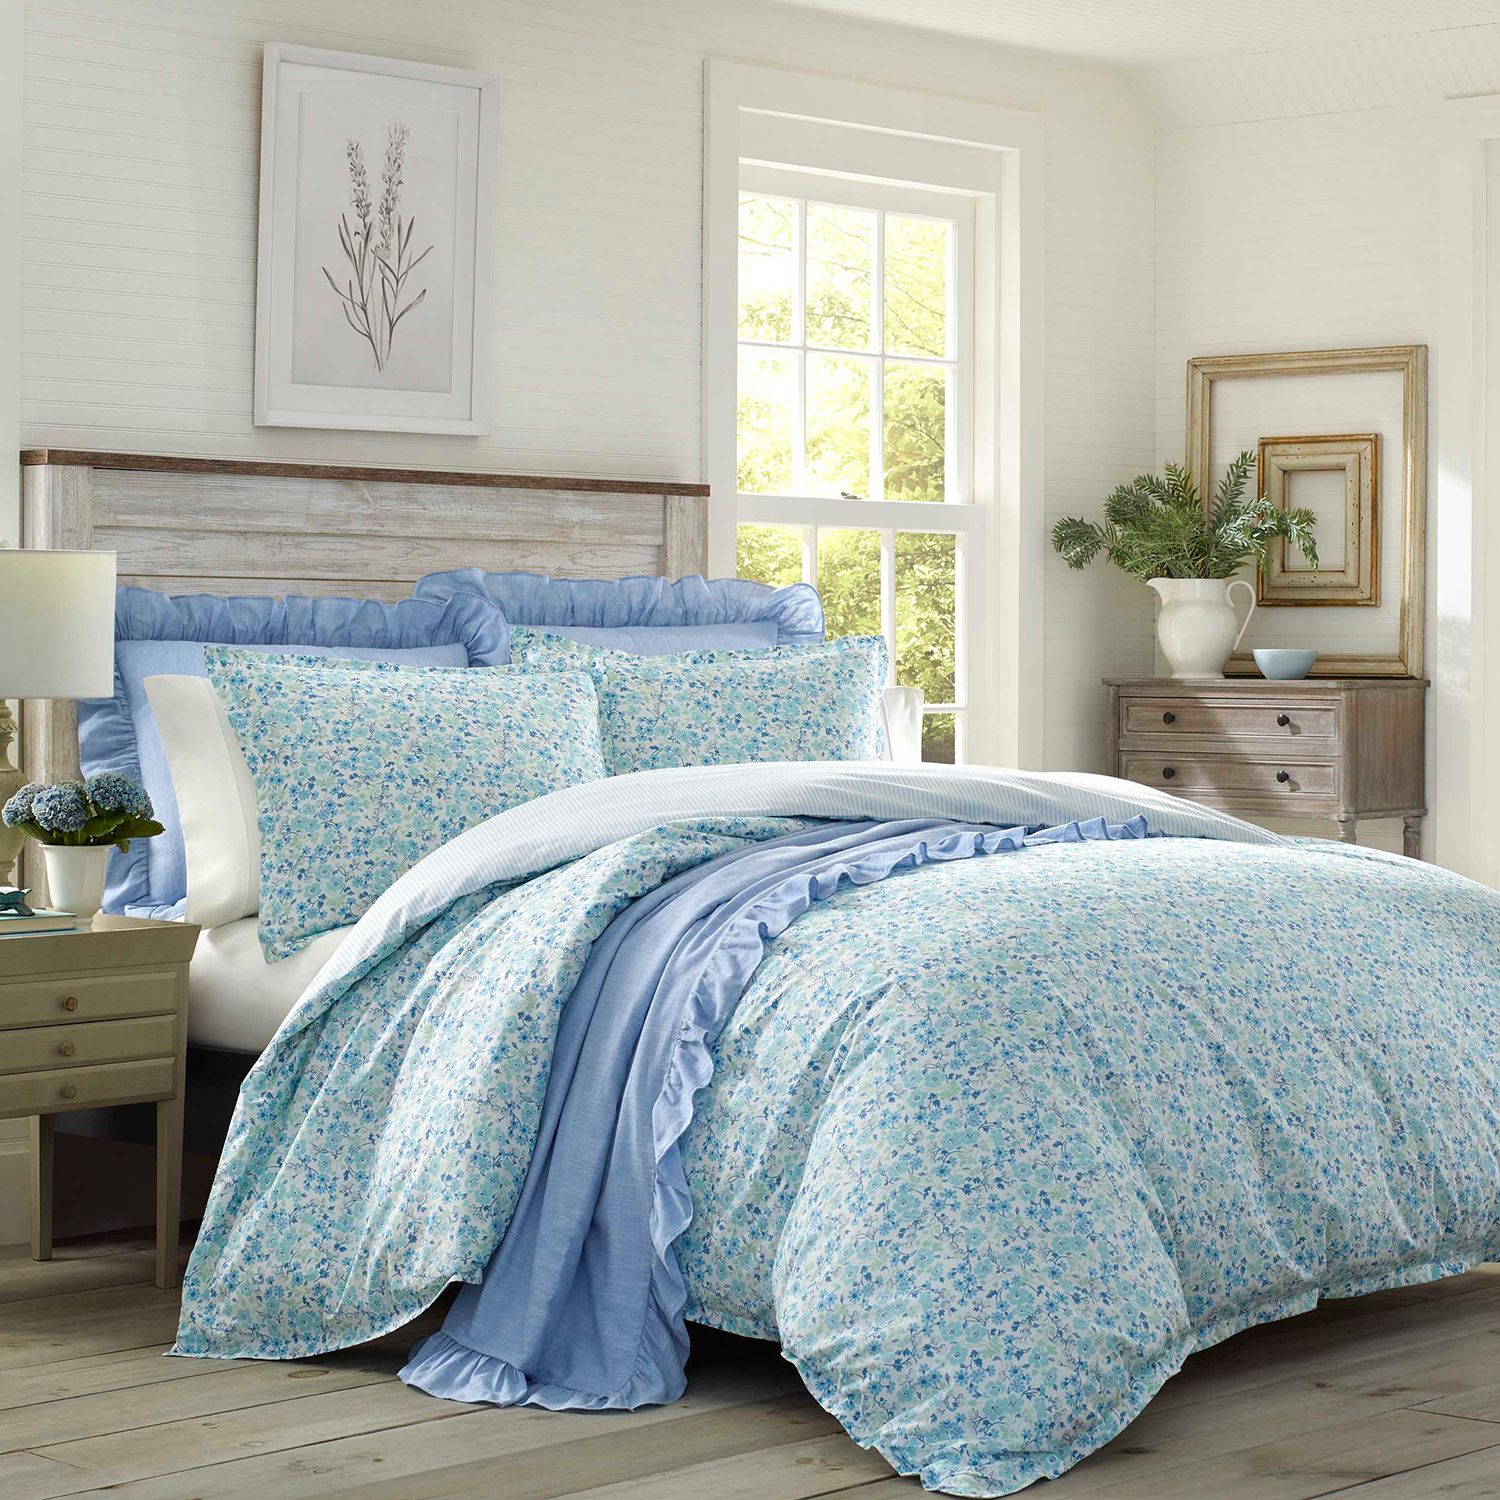 Image for Laura Ashley Lifestyles Jaynie Duvet Cover Set at Kohl's.